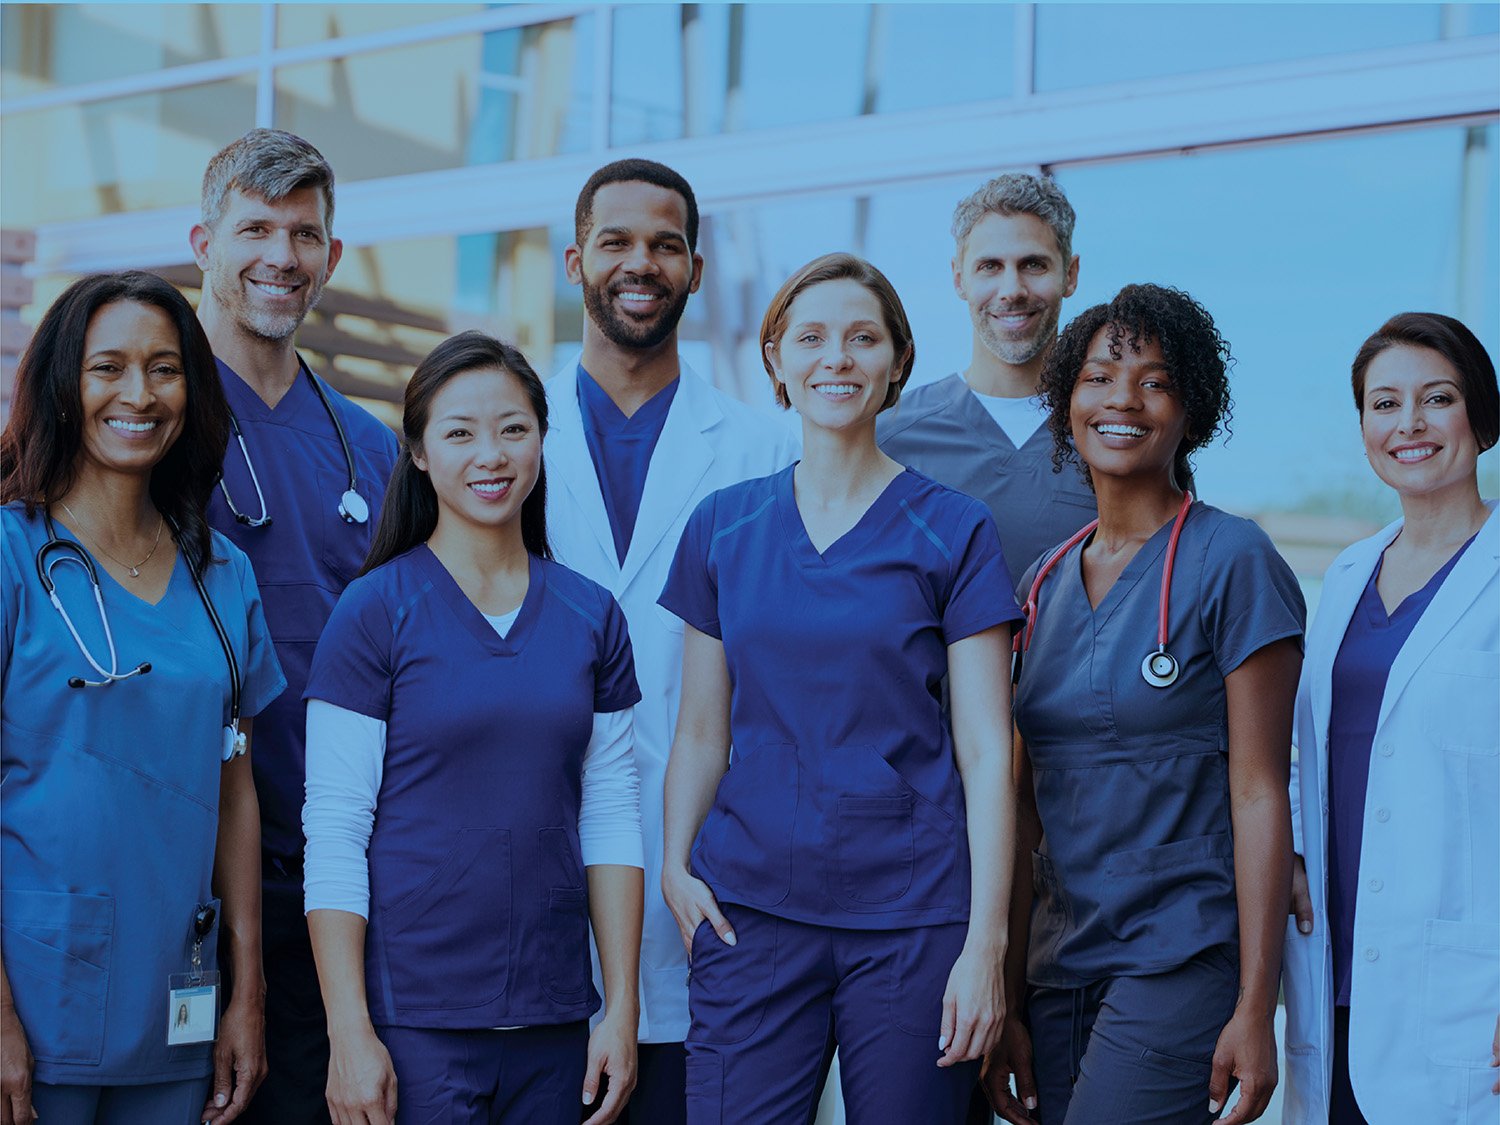 A group of physicians standing together and smiling